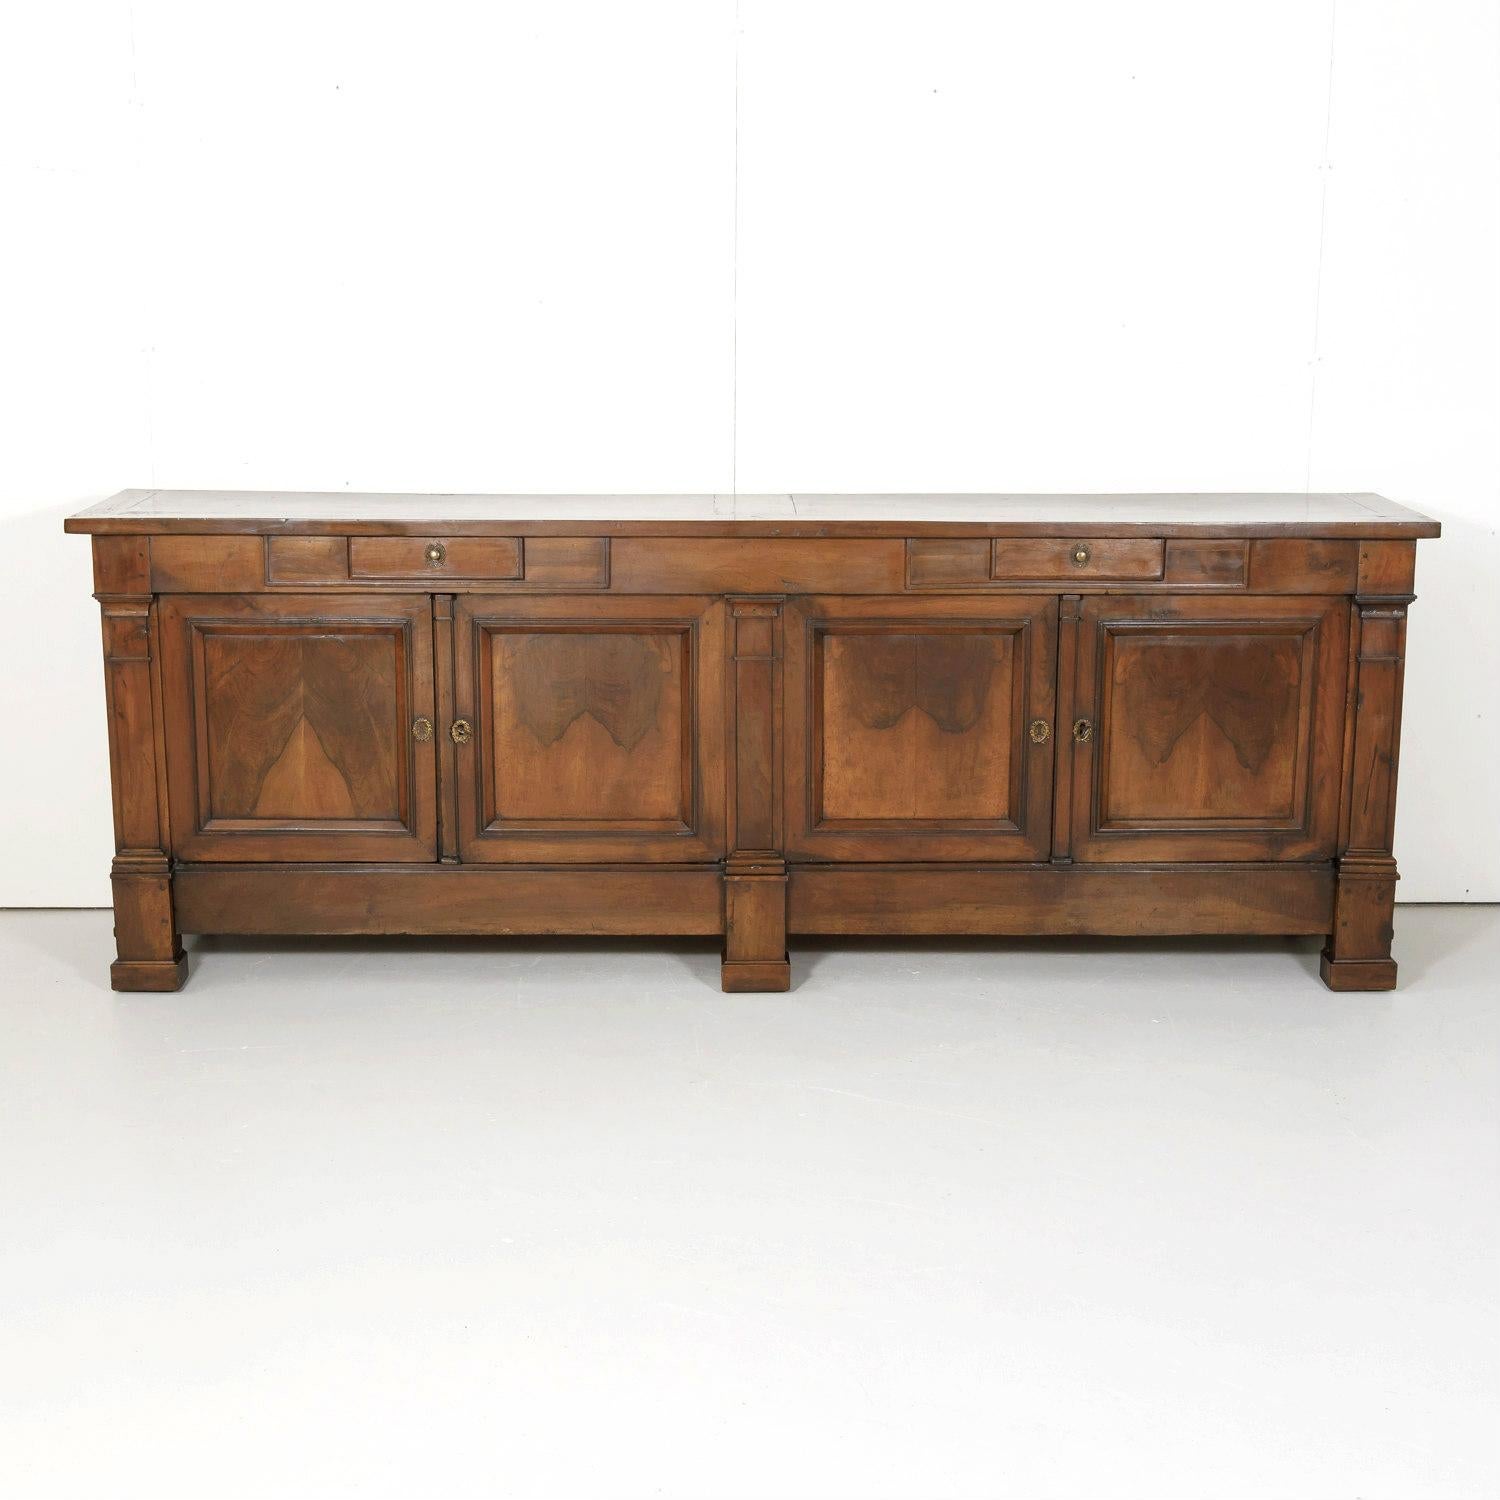 Stunning 18th century French Directoire period enfilade handcrafted of solid walnut by talented artisans in Lyon, circa 1790s. Having a rectangular top above two drawers over four panel doors divided by pilasters. Doors open to reveal a spacious